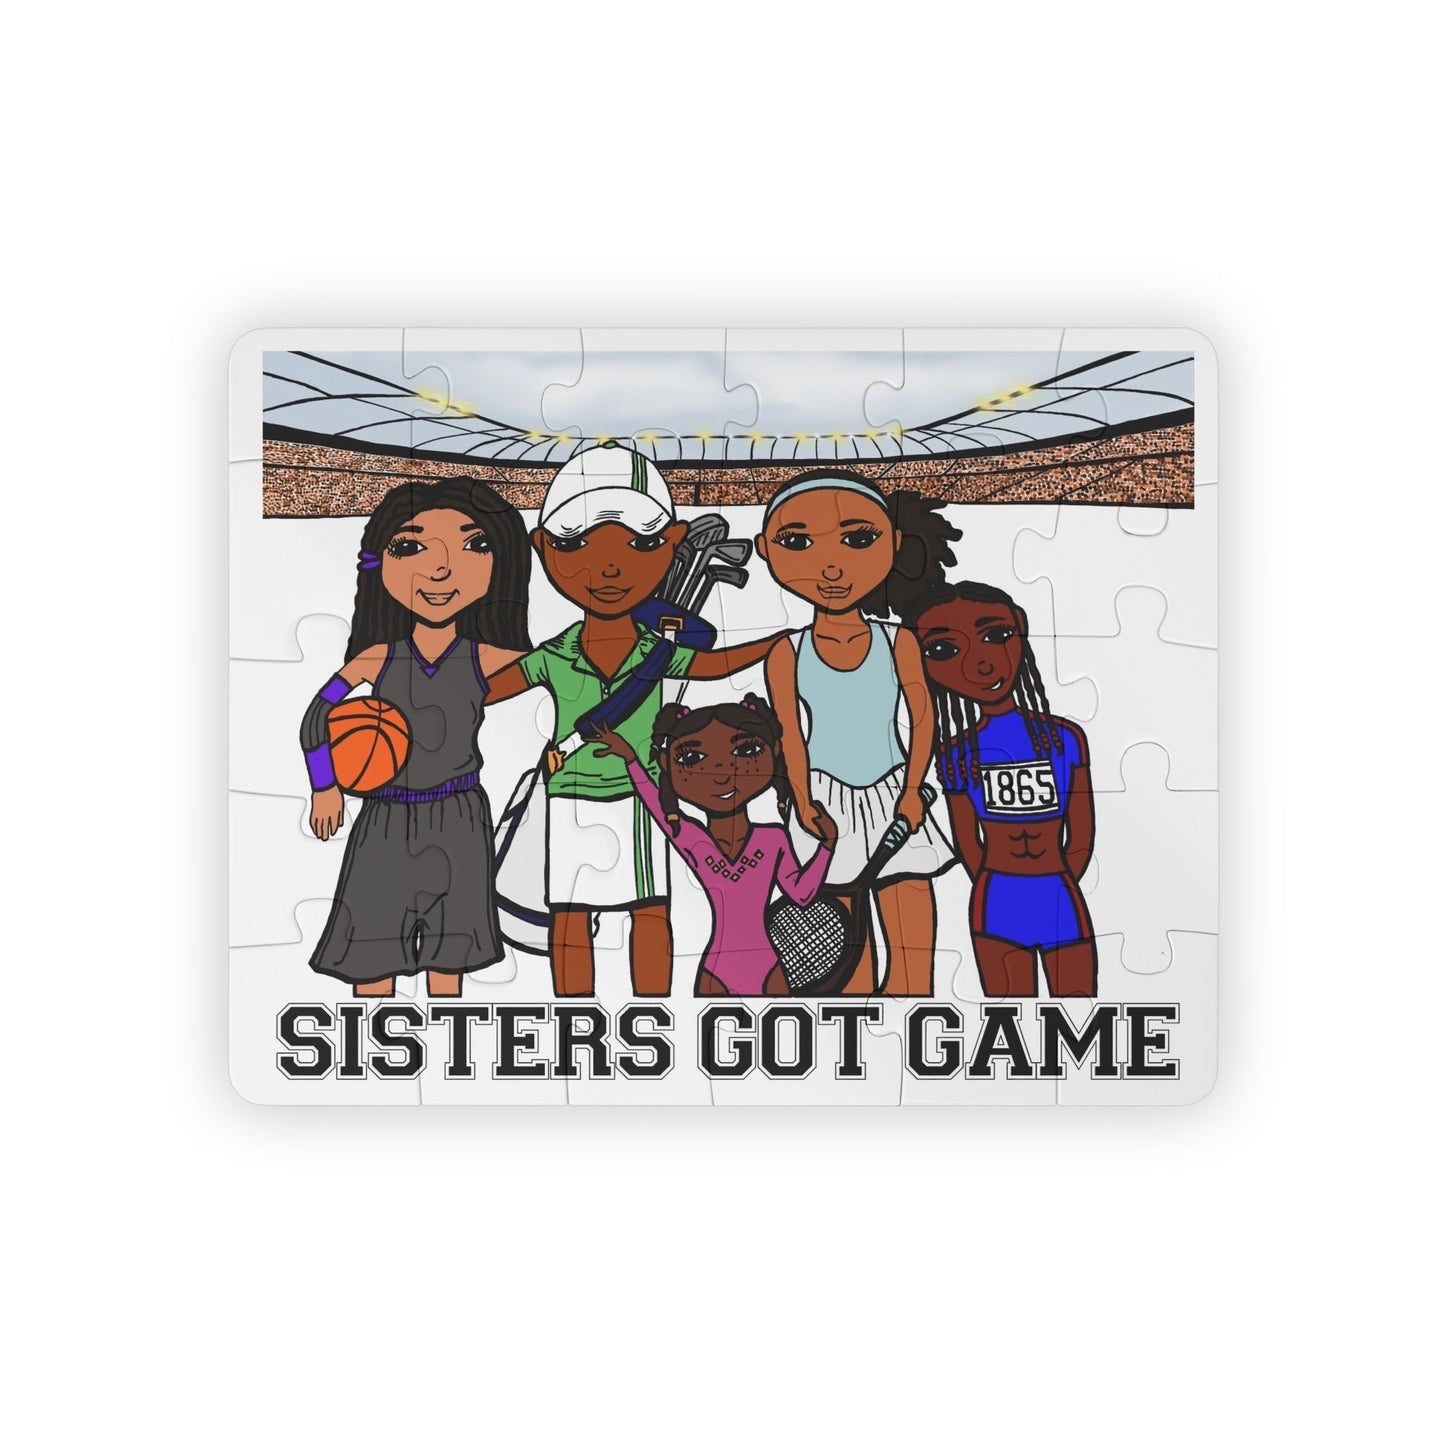 Sisters Got Game Kids' Puzzle, 30-Piece | Applauding the Dynamic Women of Sports